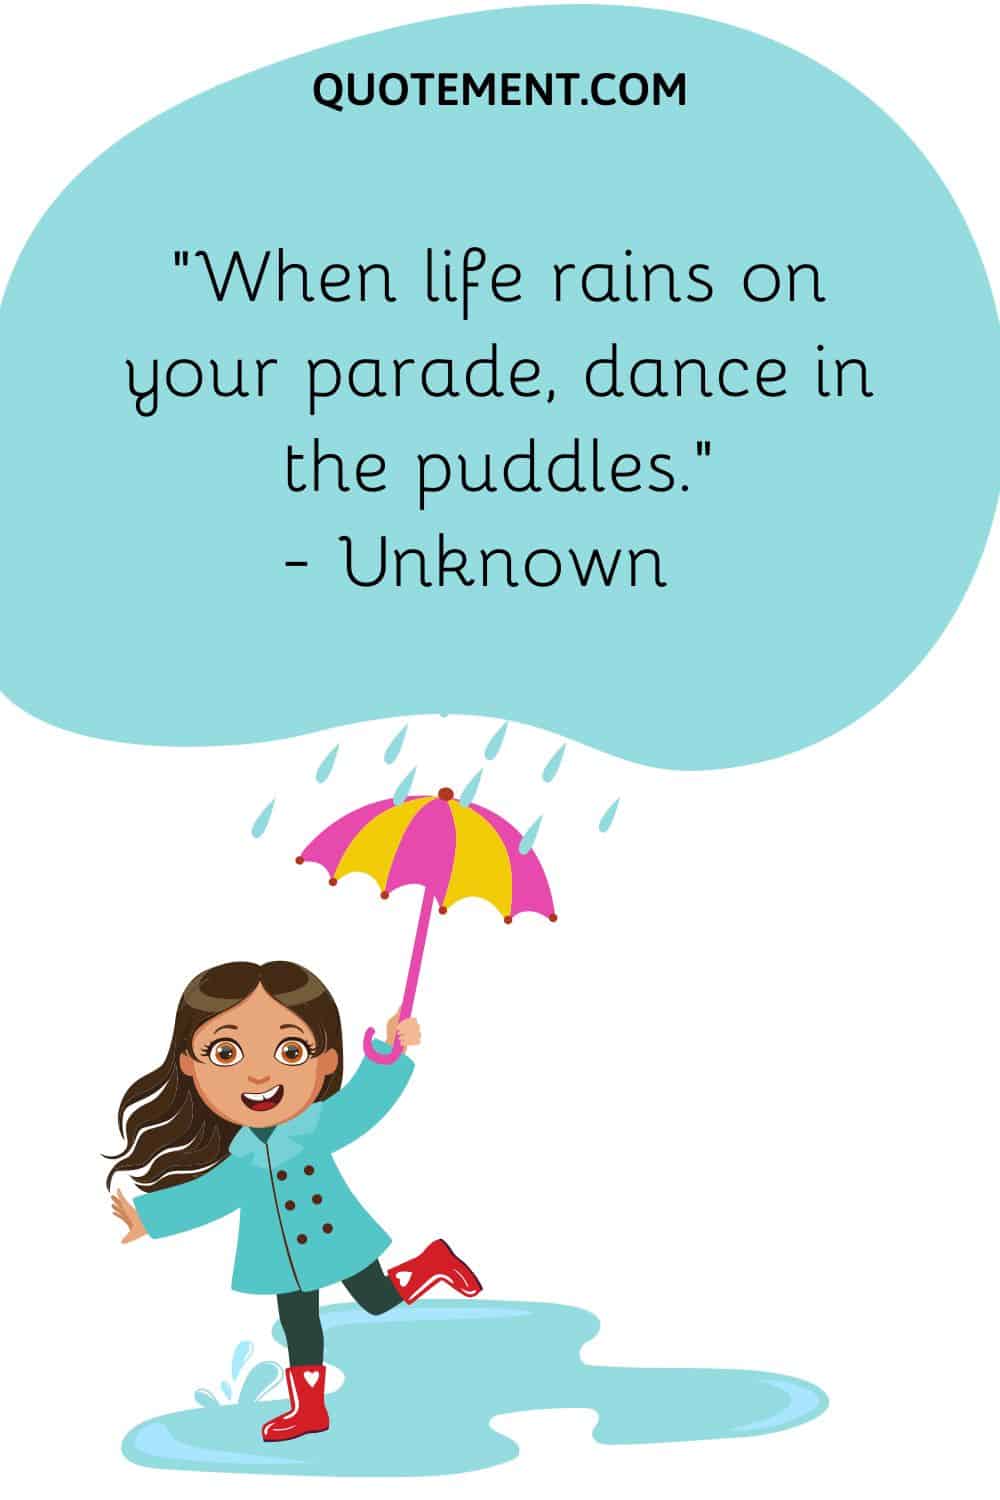 When life rains on your parade, dance in the puddles